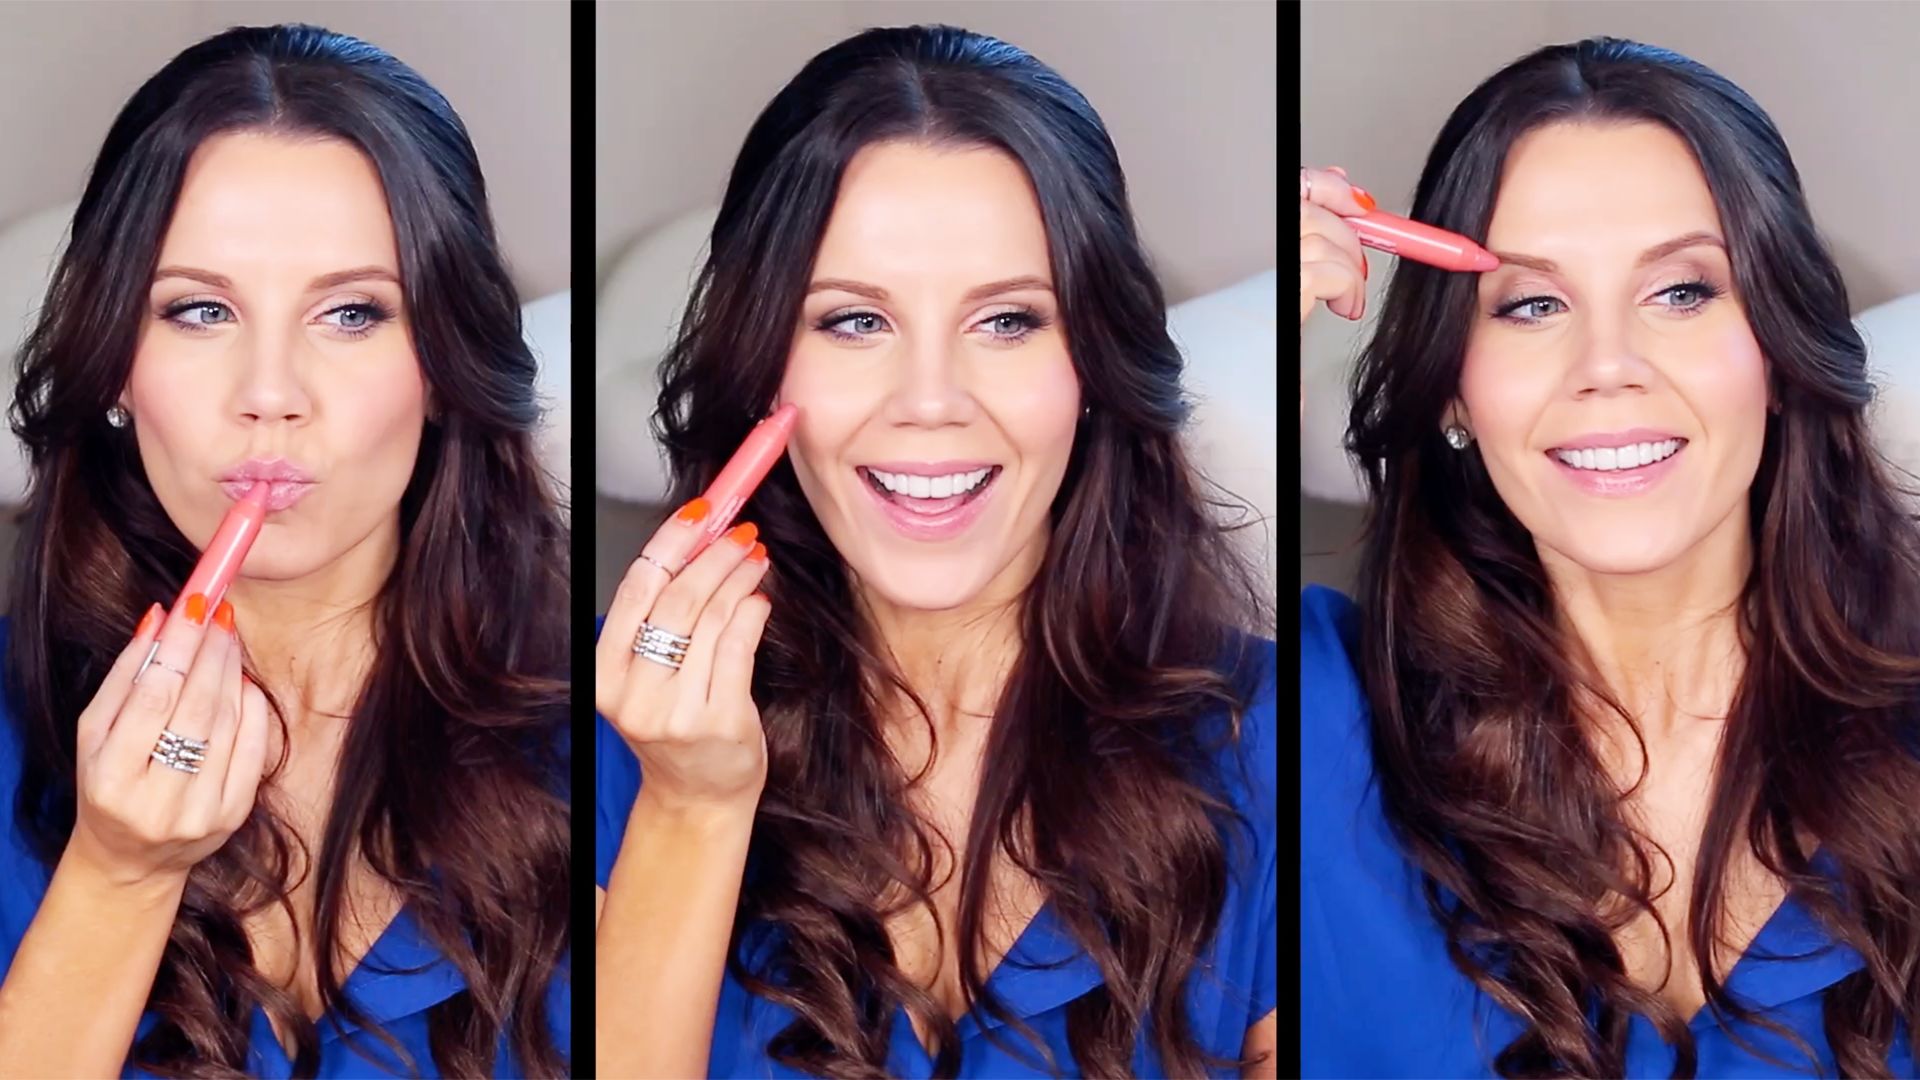 7 Steps to Nail The Cute Makeup Ideas for Your Everyday Allure